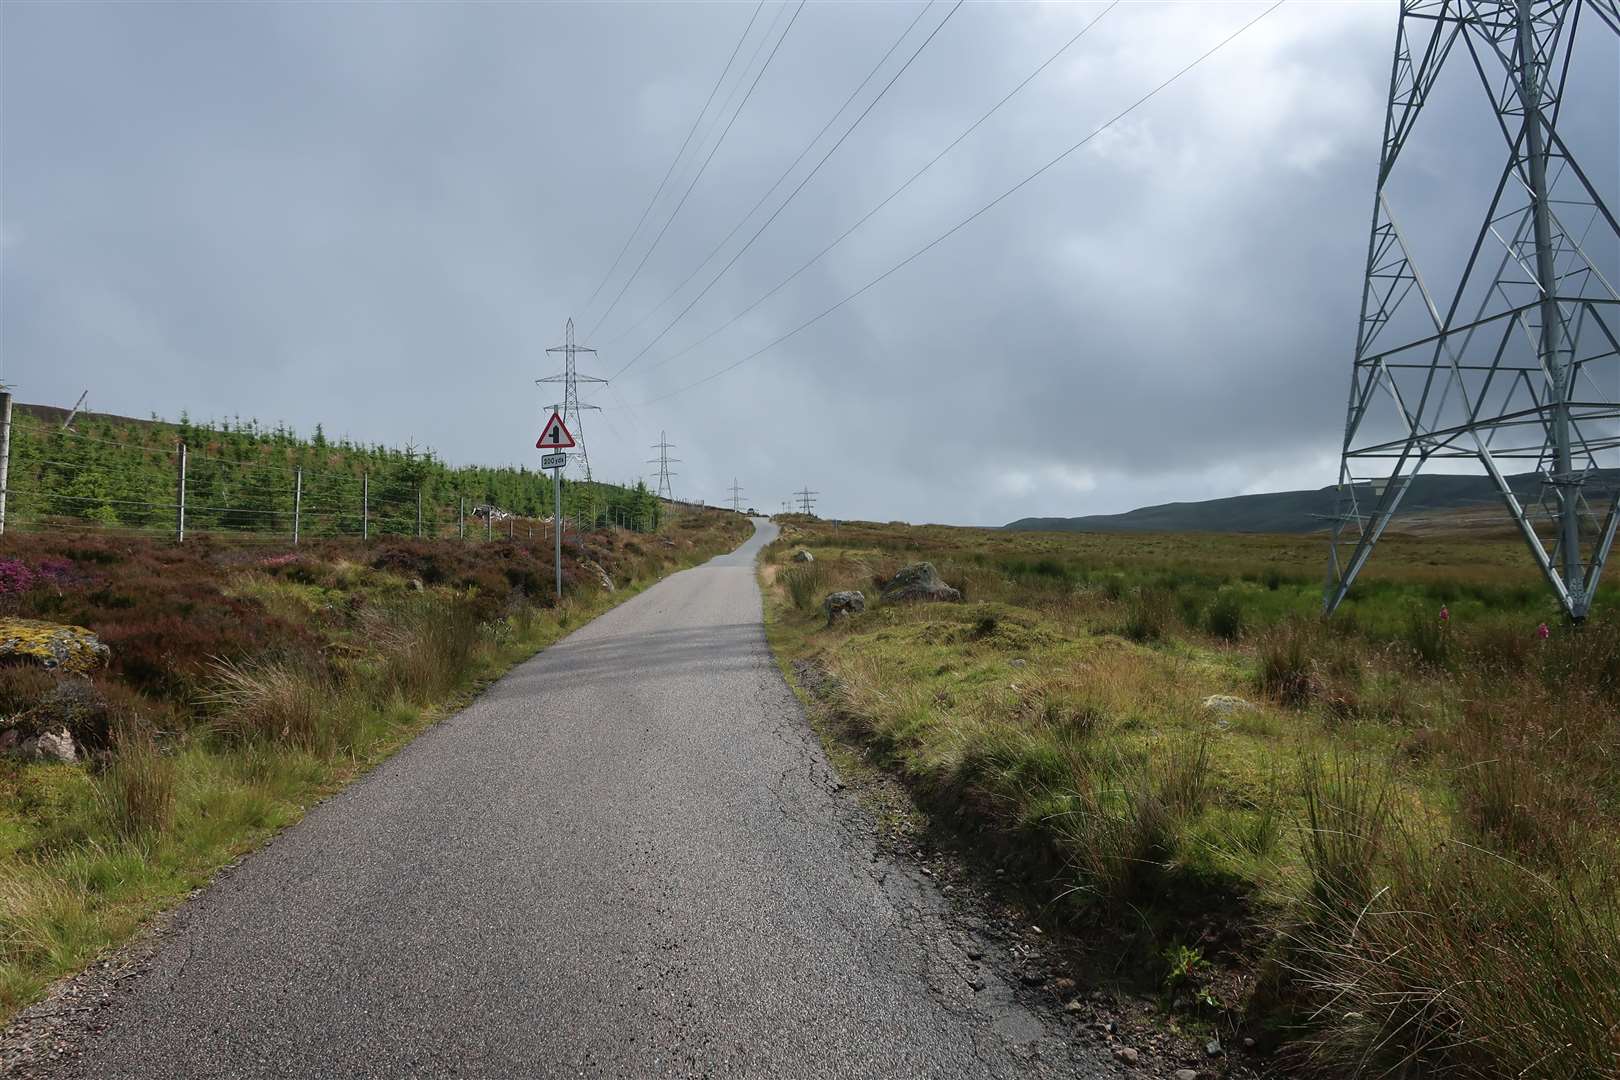 The road climbs between the pylons on its way to the wind farm.